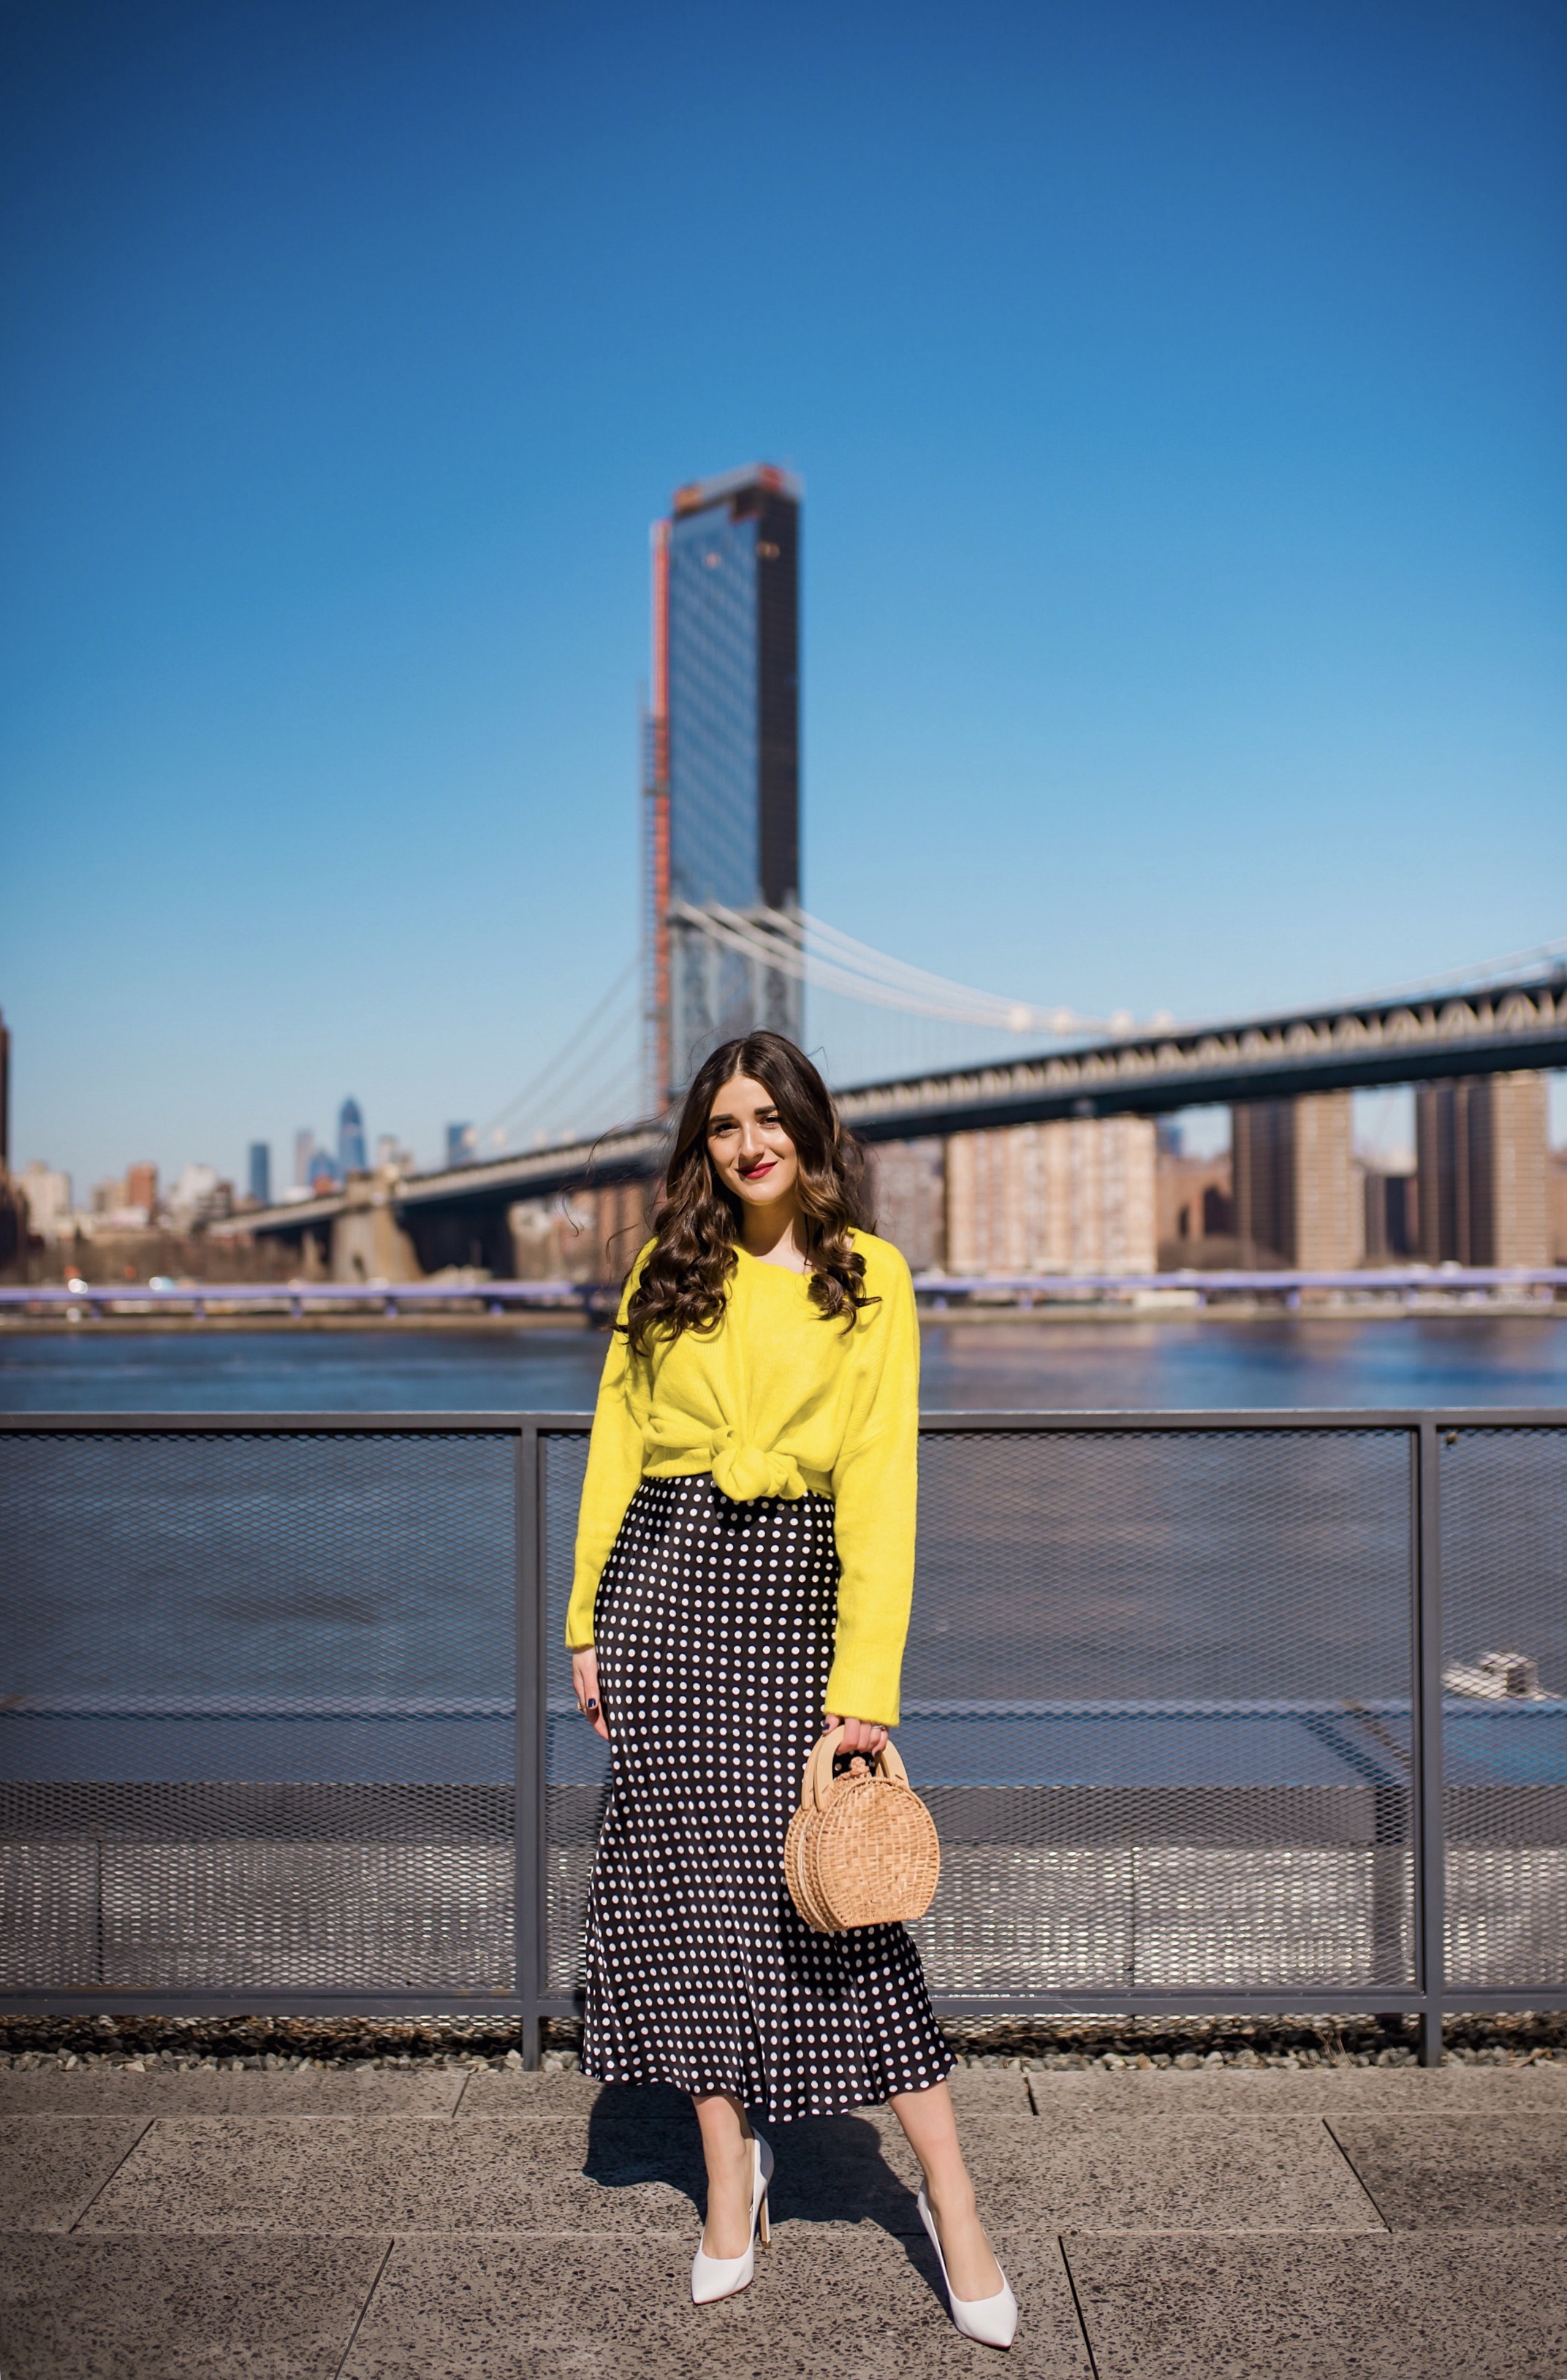 How I Wound Up With Boring White Dishes Navy Polka Dot Dress Neon Yellow Knotted Sweater Esther Santer Fashion Blog NYC Street Style Blogger Outfit OOTD Trendy Shopping Girl White Heels What How To Wear Dumbo Brooklyn Bridge Laurel Creative Photoshoot.JPG